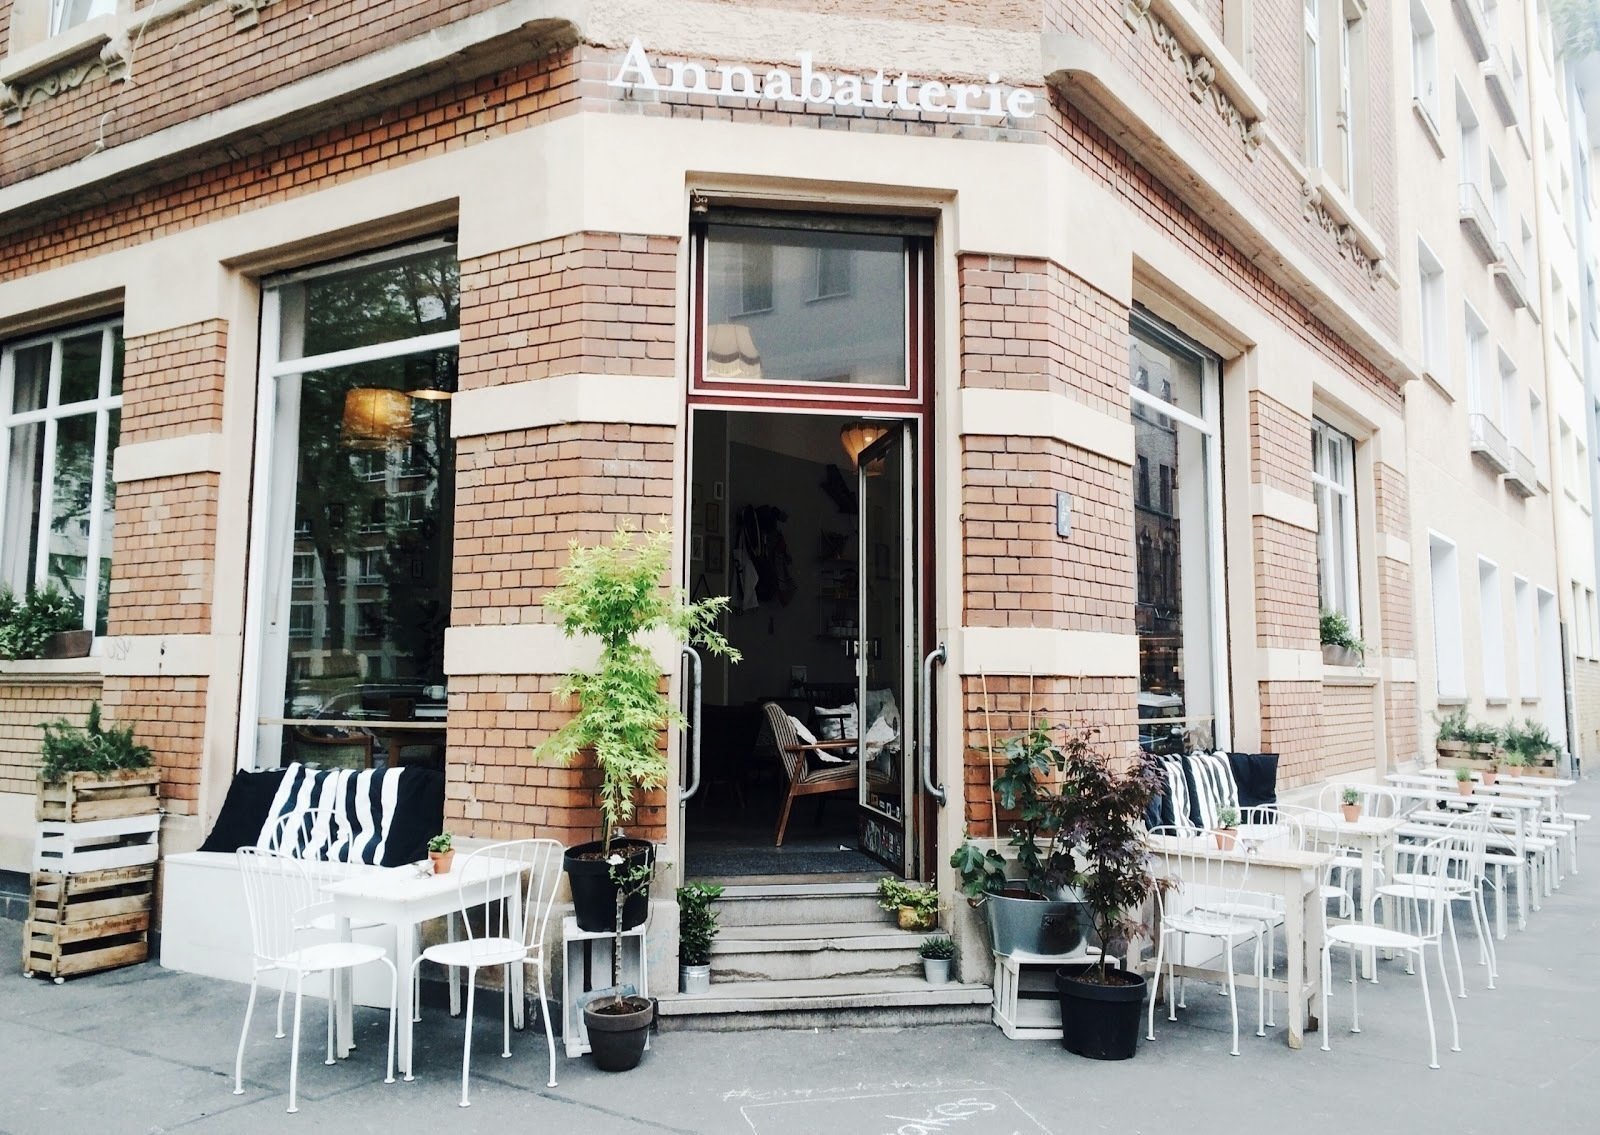 <span class="translation_missing" title="translation missing: en.meta.location_title, location_name: Café Annabatterie, city: Mainz">Location Title</span>